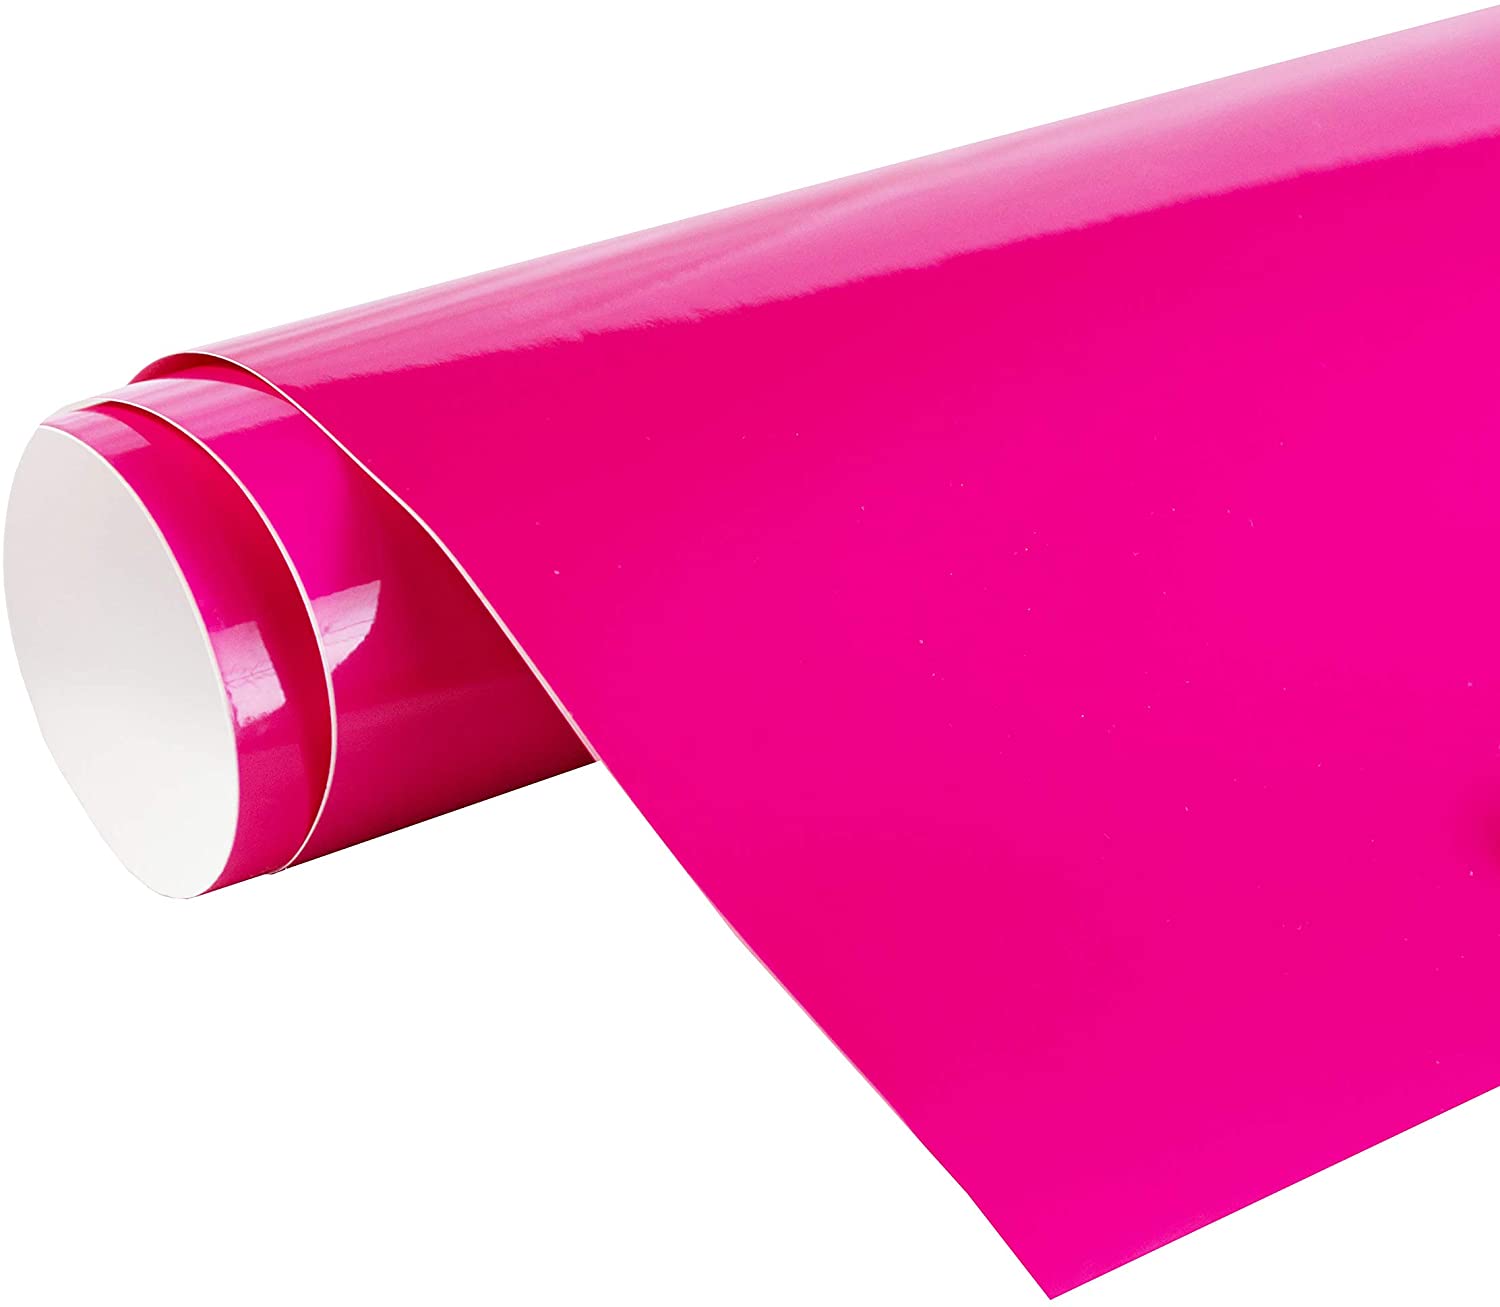 24 x 20 ft Roll of glossy Hottest Pink Repositionable Adhesive-Backed Vinyl  for Craft Cutters, Punches and Vinyl Sign Cutters 